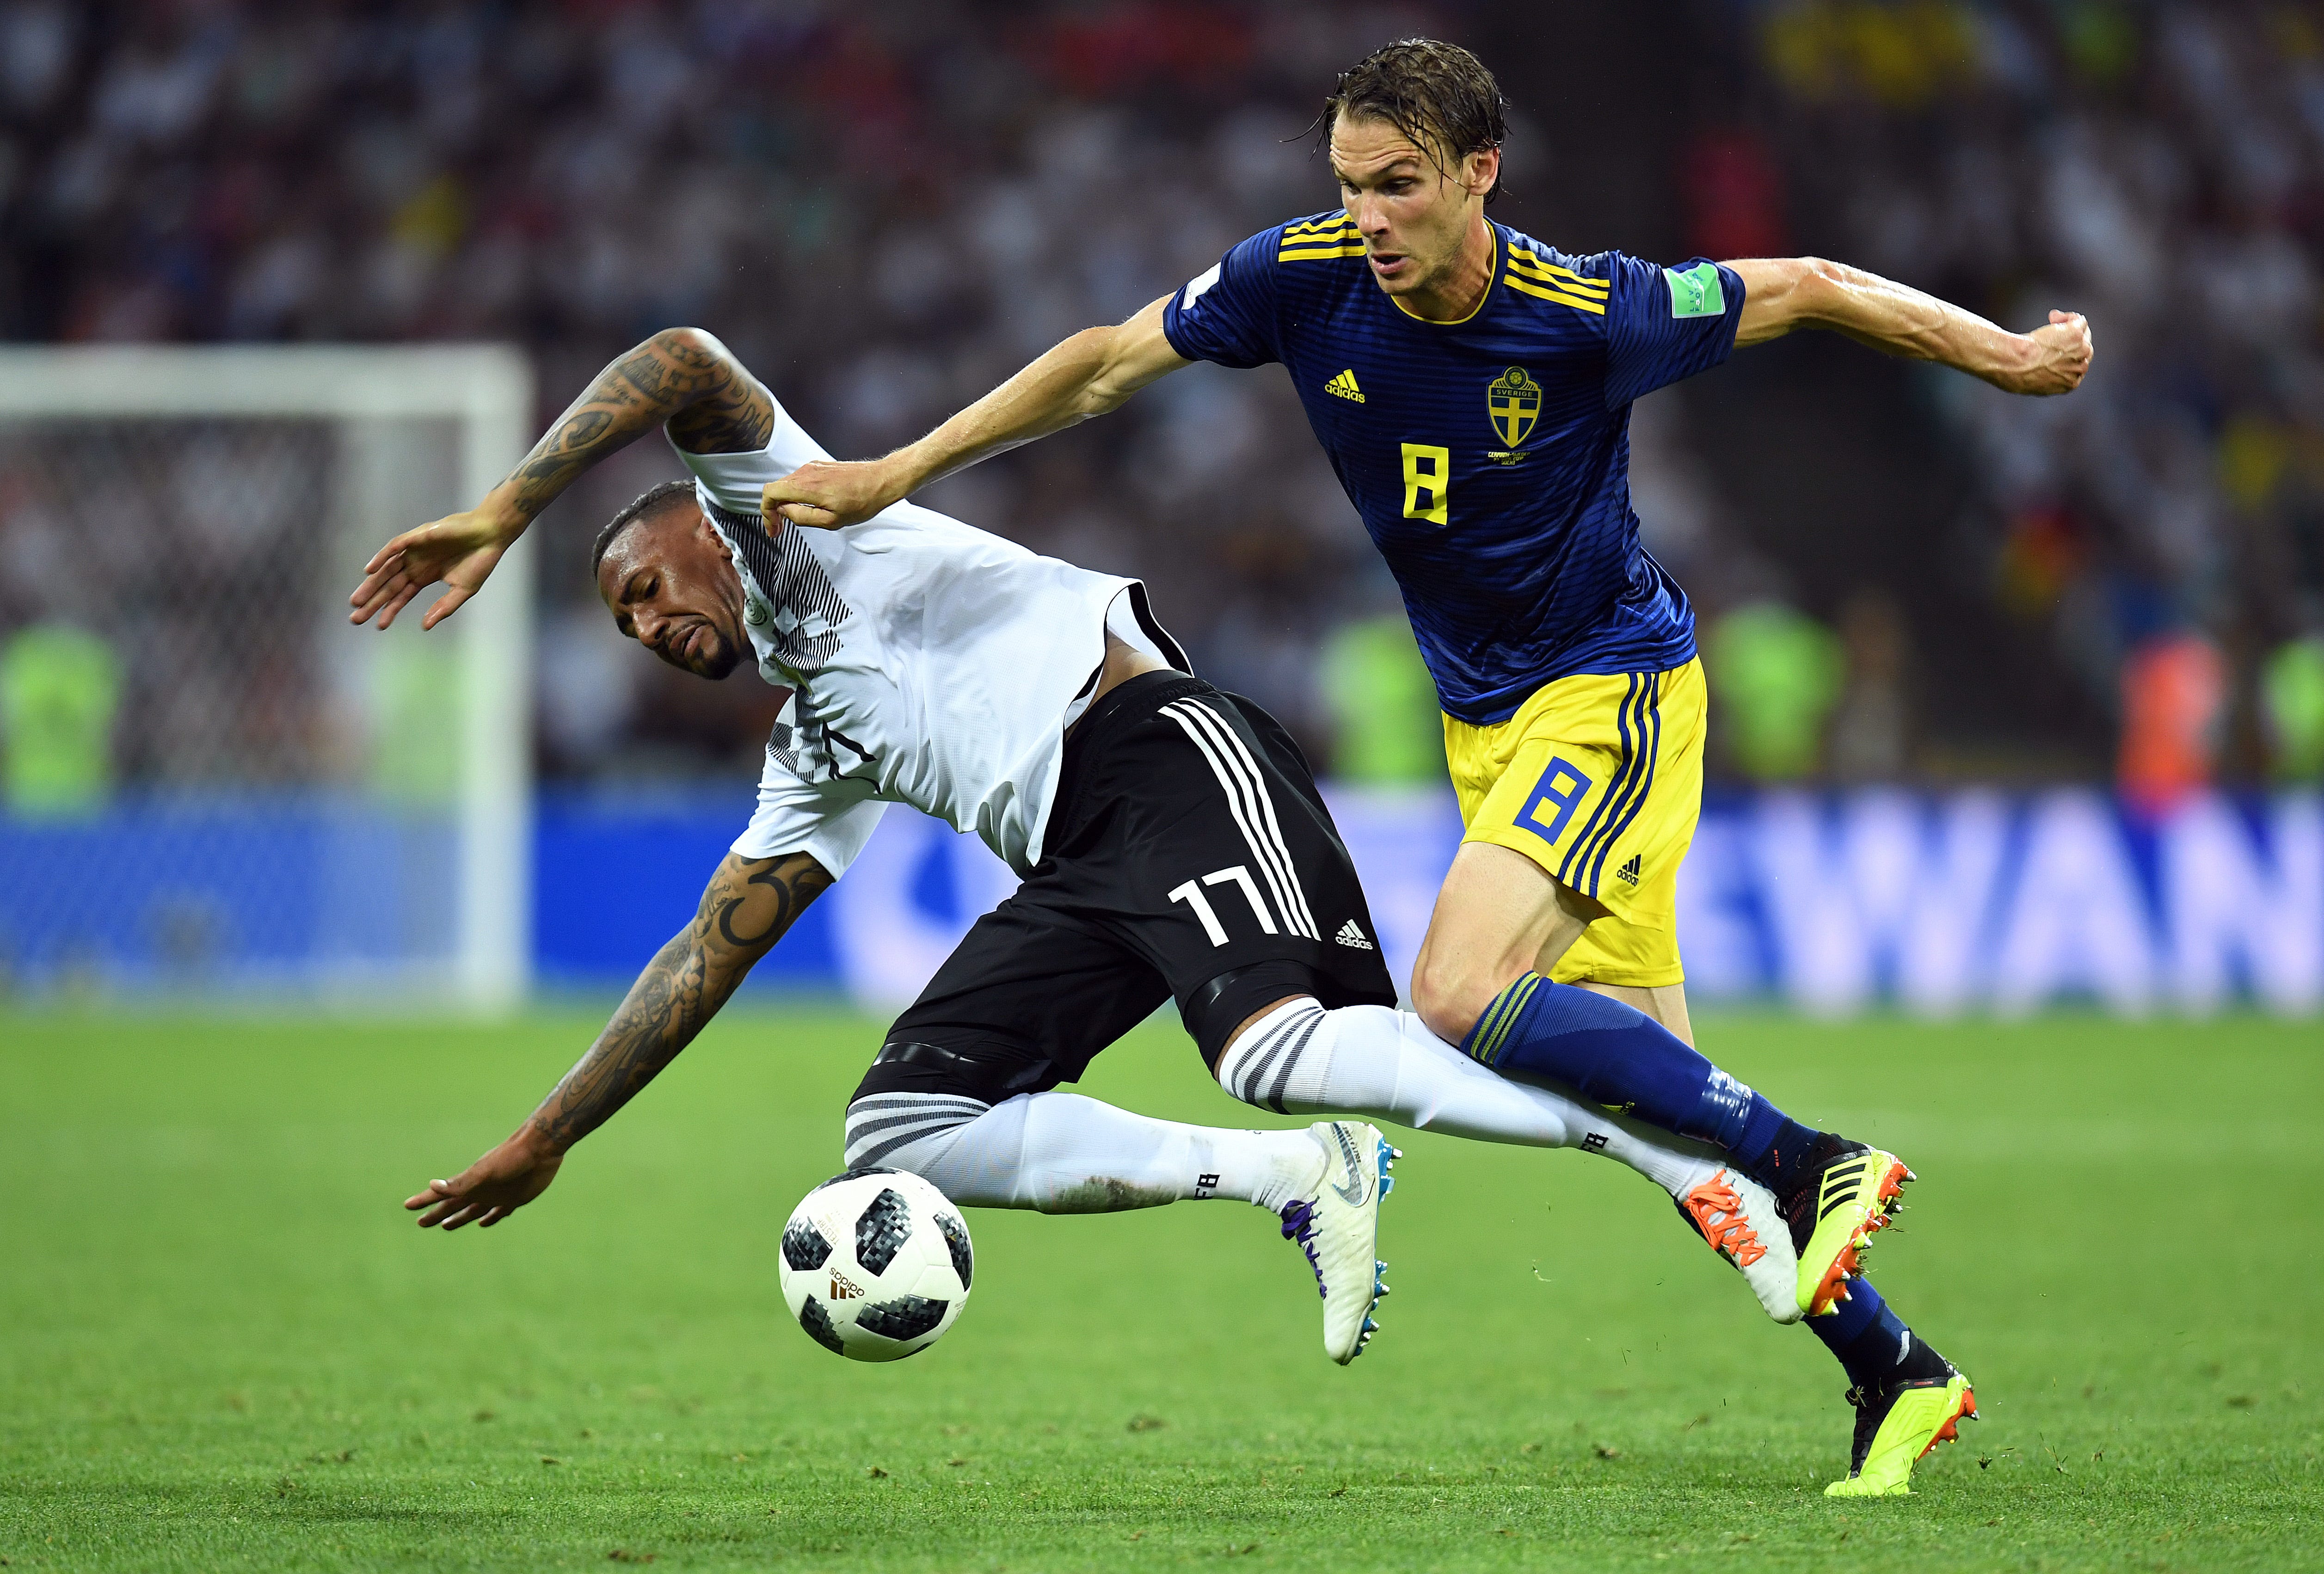 Germany defender Jerome Boateng, left, plays for the ball against Sweden midfielder Albin Ekdal in Group F play during the FIFA World Cup 2018 at Fisht Stadium in Sochi, Russia.